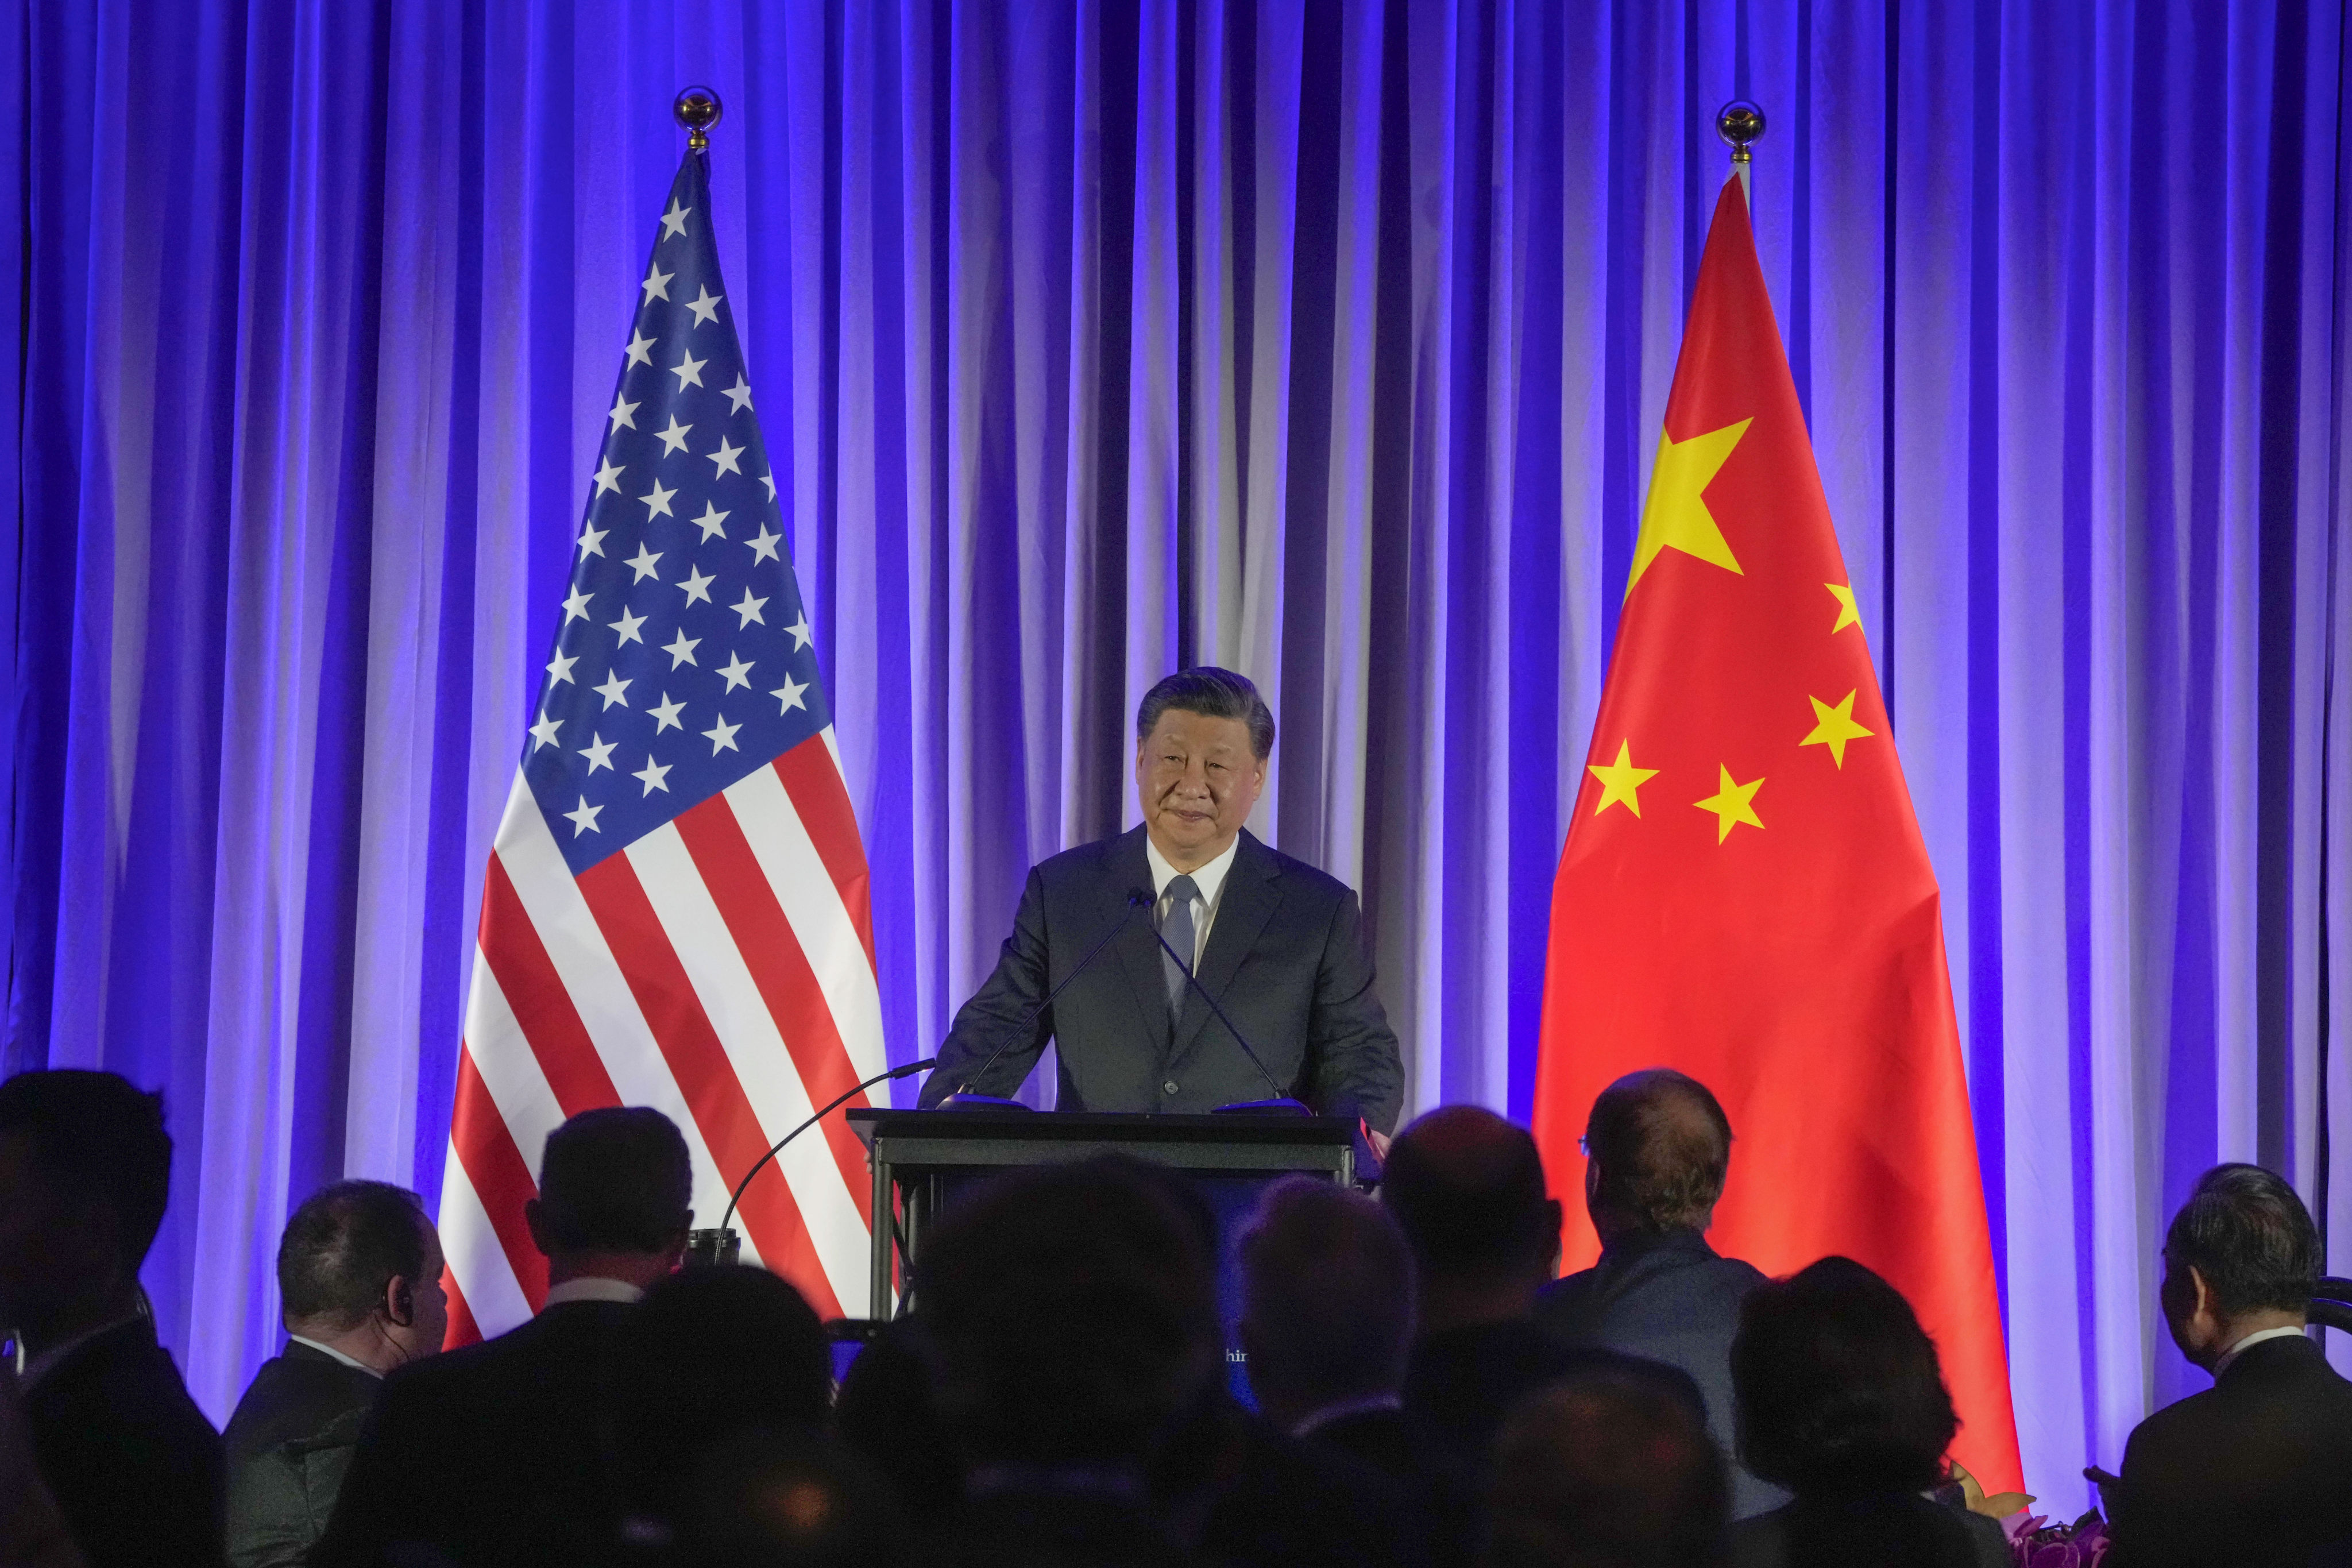 President Xi Jinping speaks at a dinner with business leaders during the Asia-Pacific Economic Cooperation conference on Wednesday in San Francisco. Photo: AP